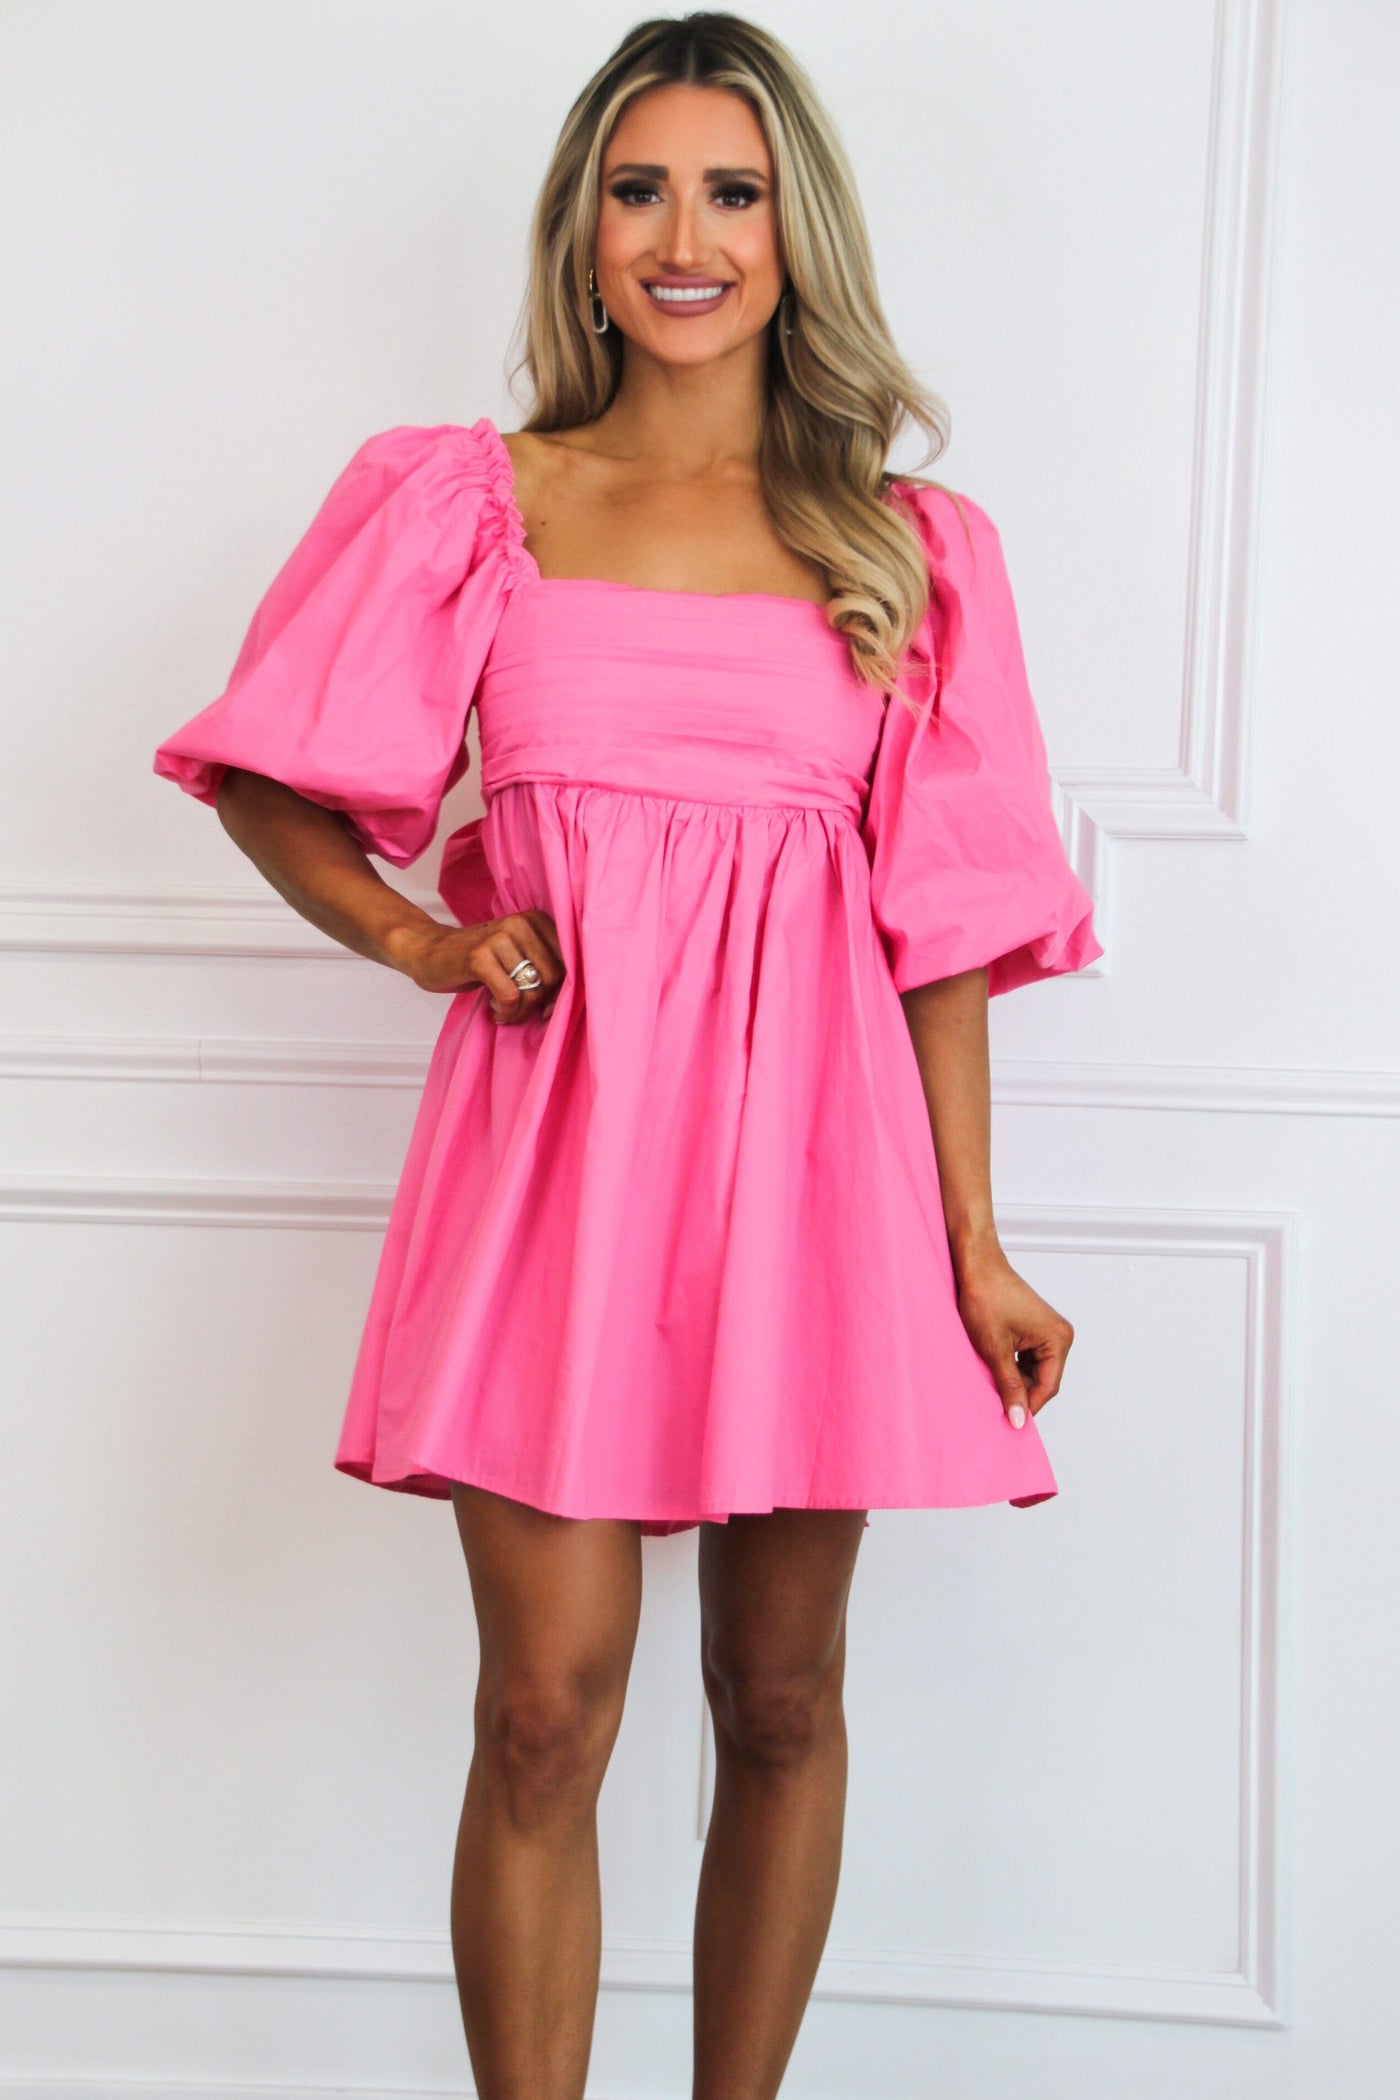 Maggie Bow Back Babydoll Dress: Hot Pink - Bella and Bloom Boutique